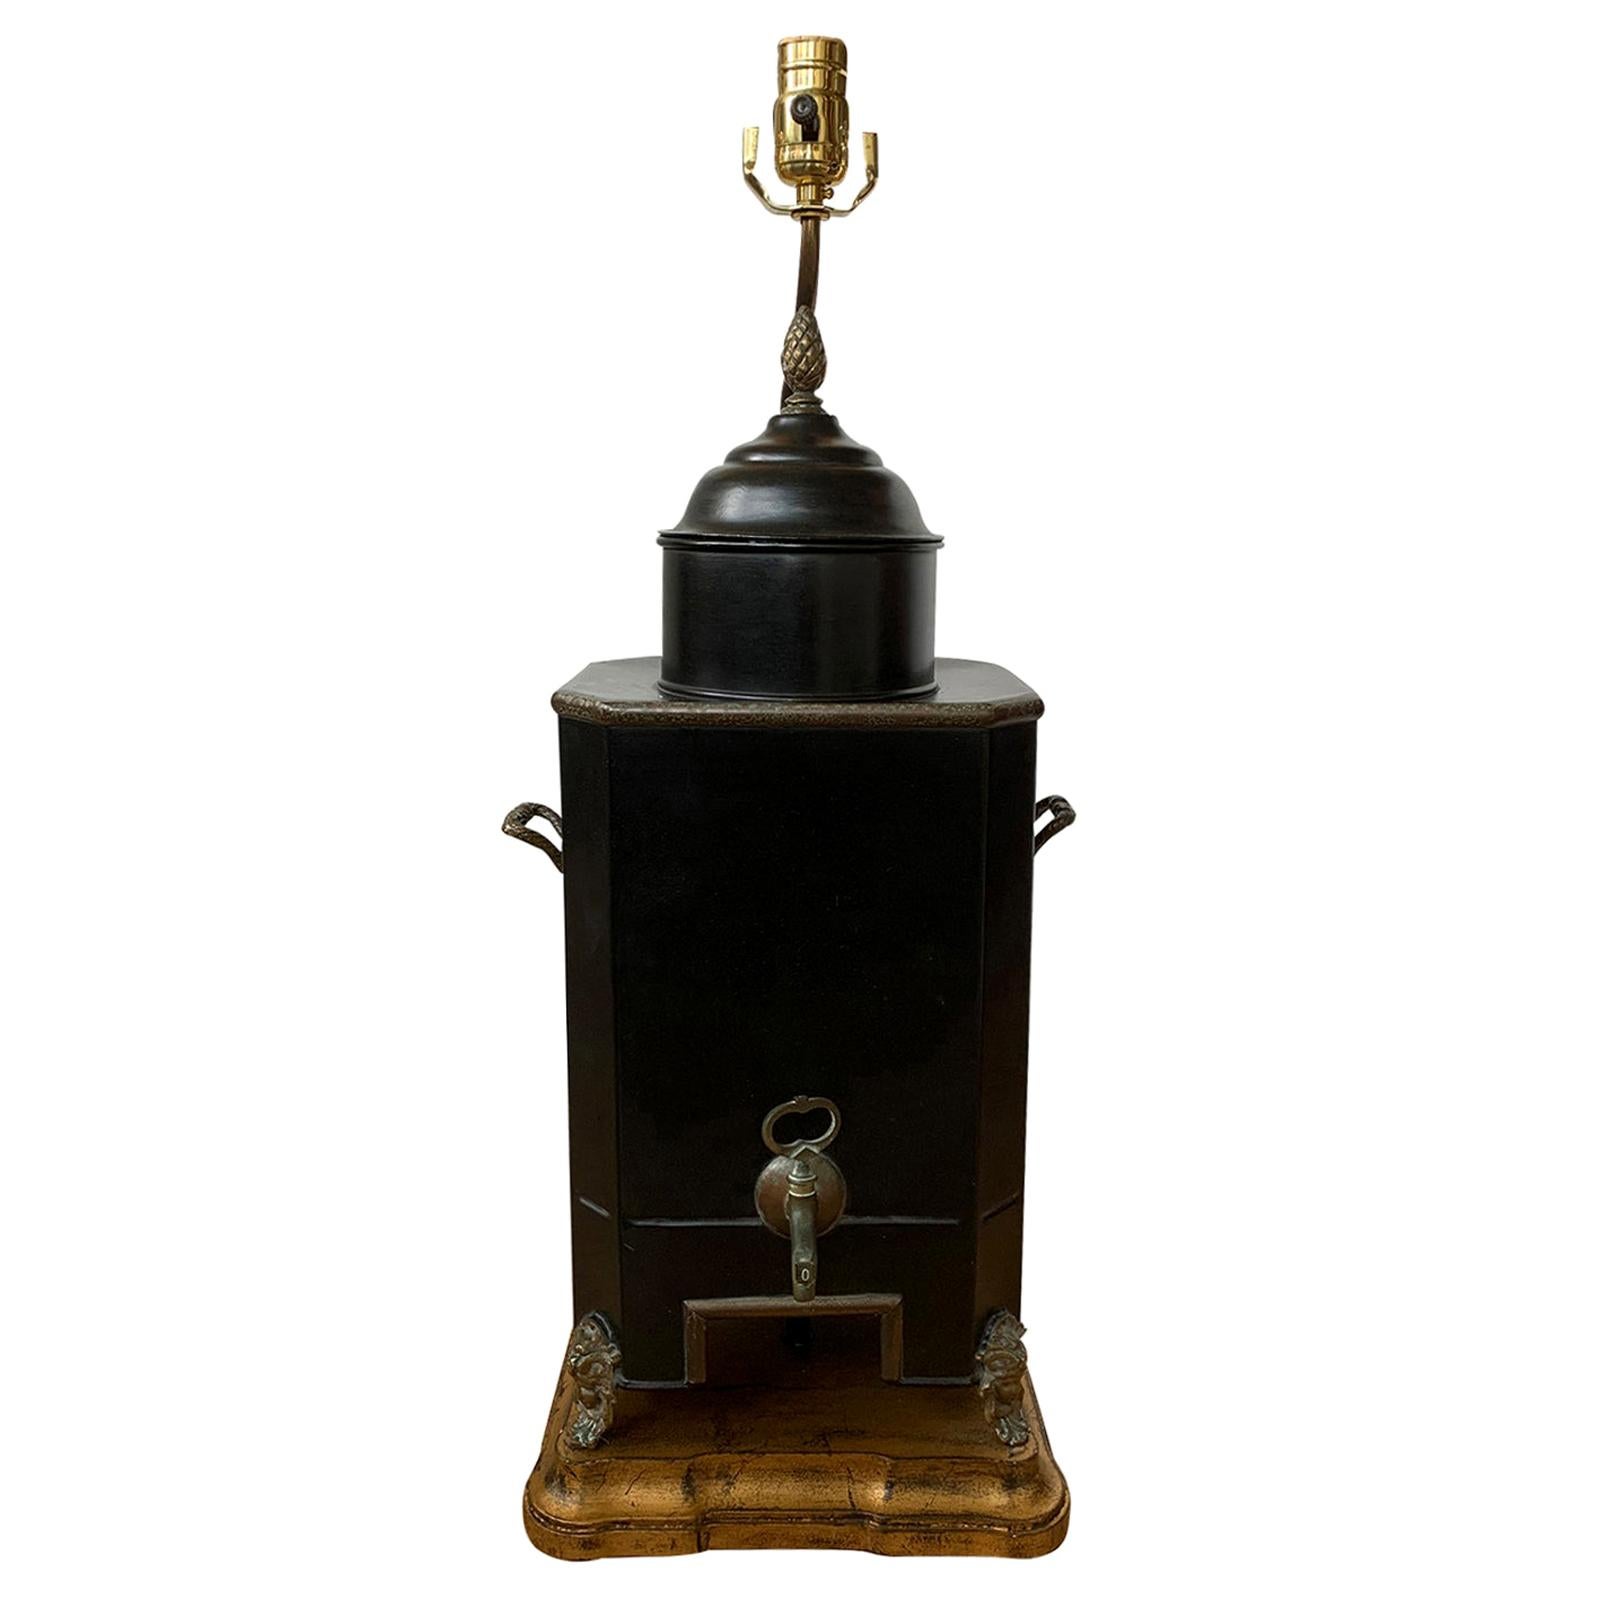 19th-20th Century Regency Style Hot Water Urn as Lamp